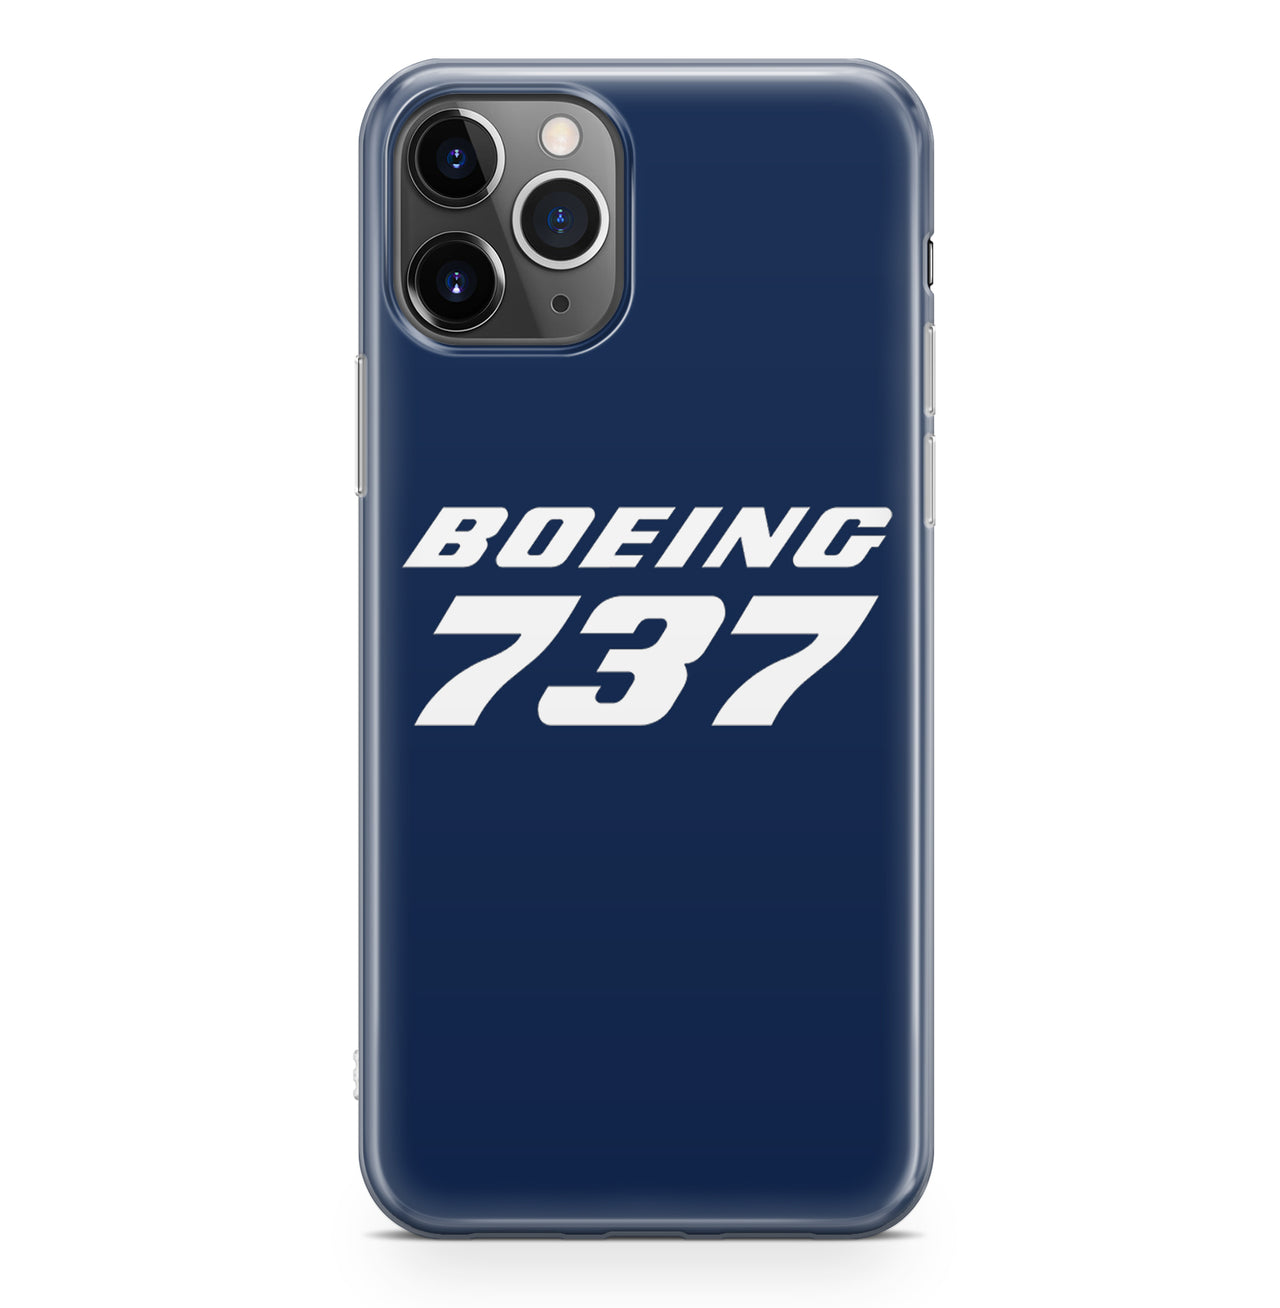 Boeing 737 & Text Designed iPhone Cases